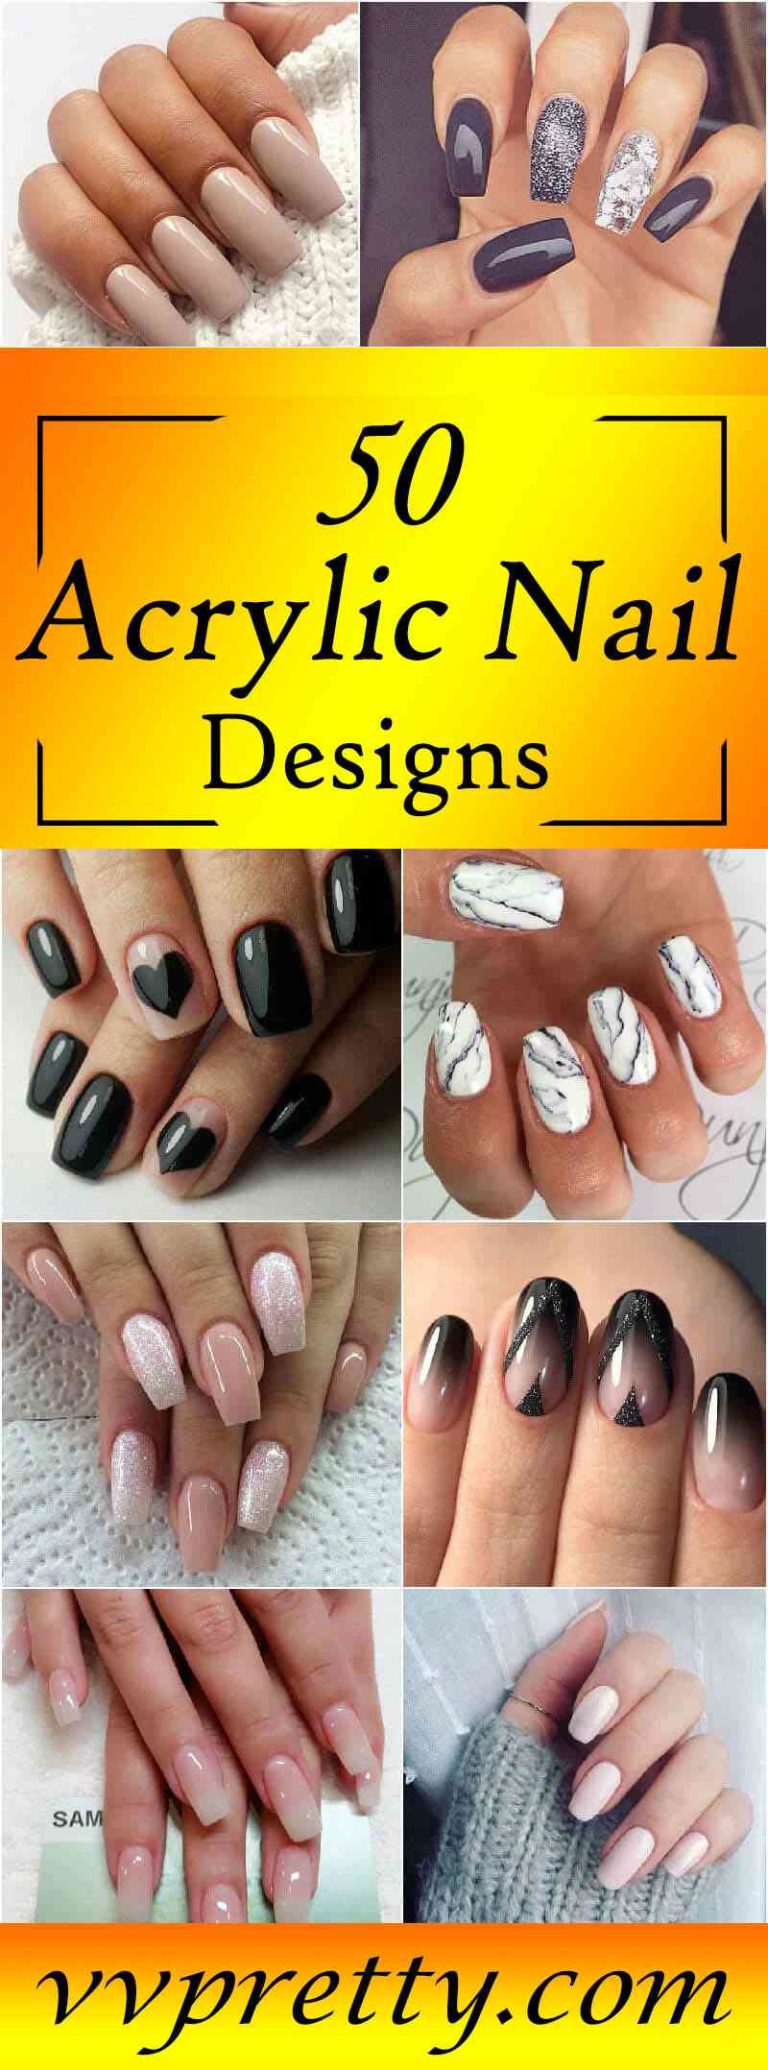 Create a Statement with Nails Acrylic Designs